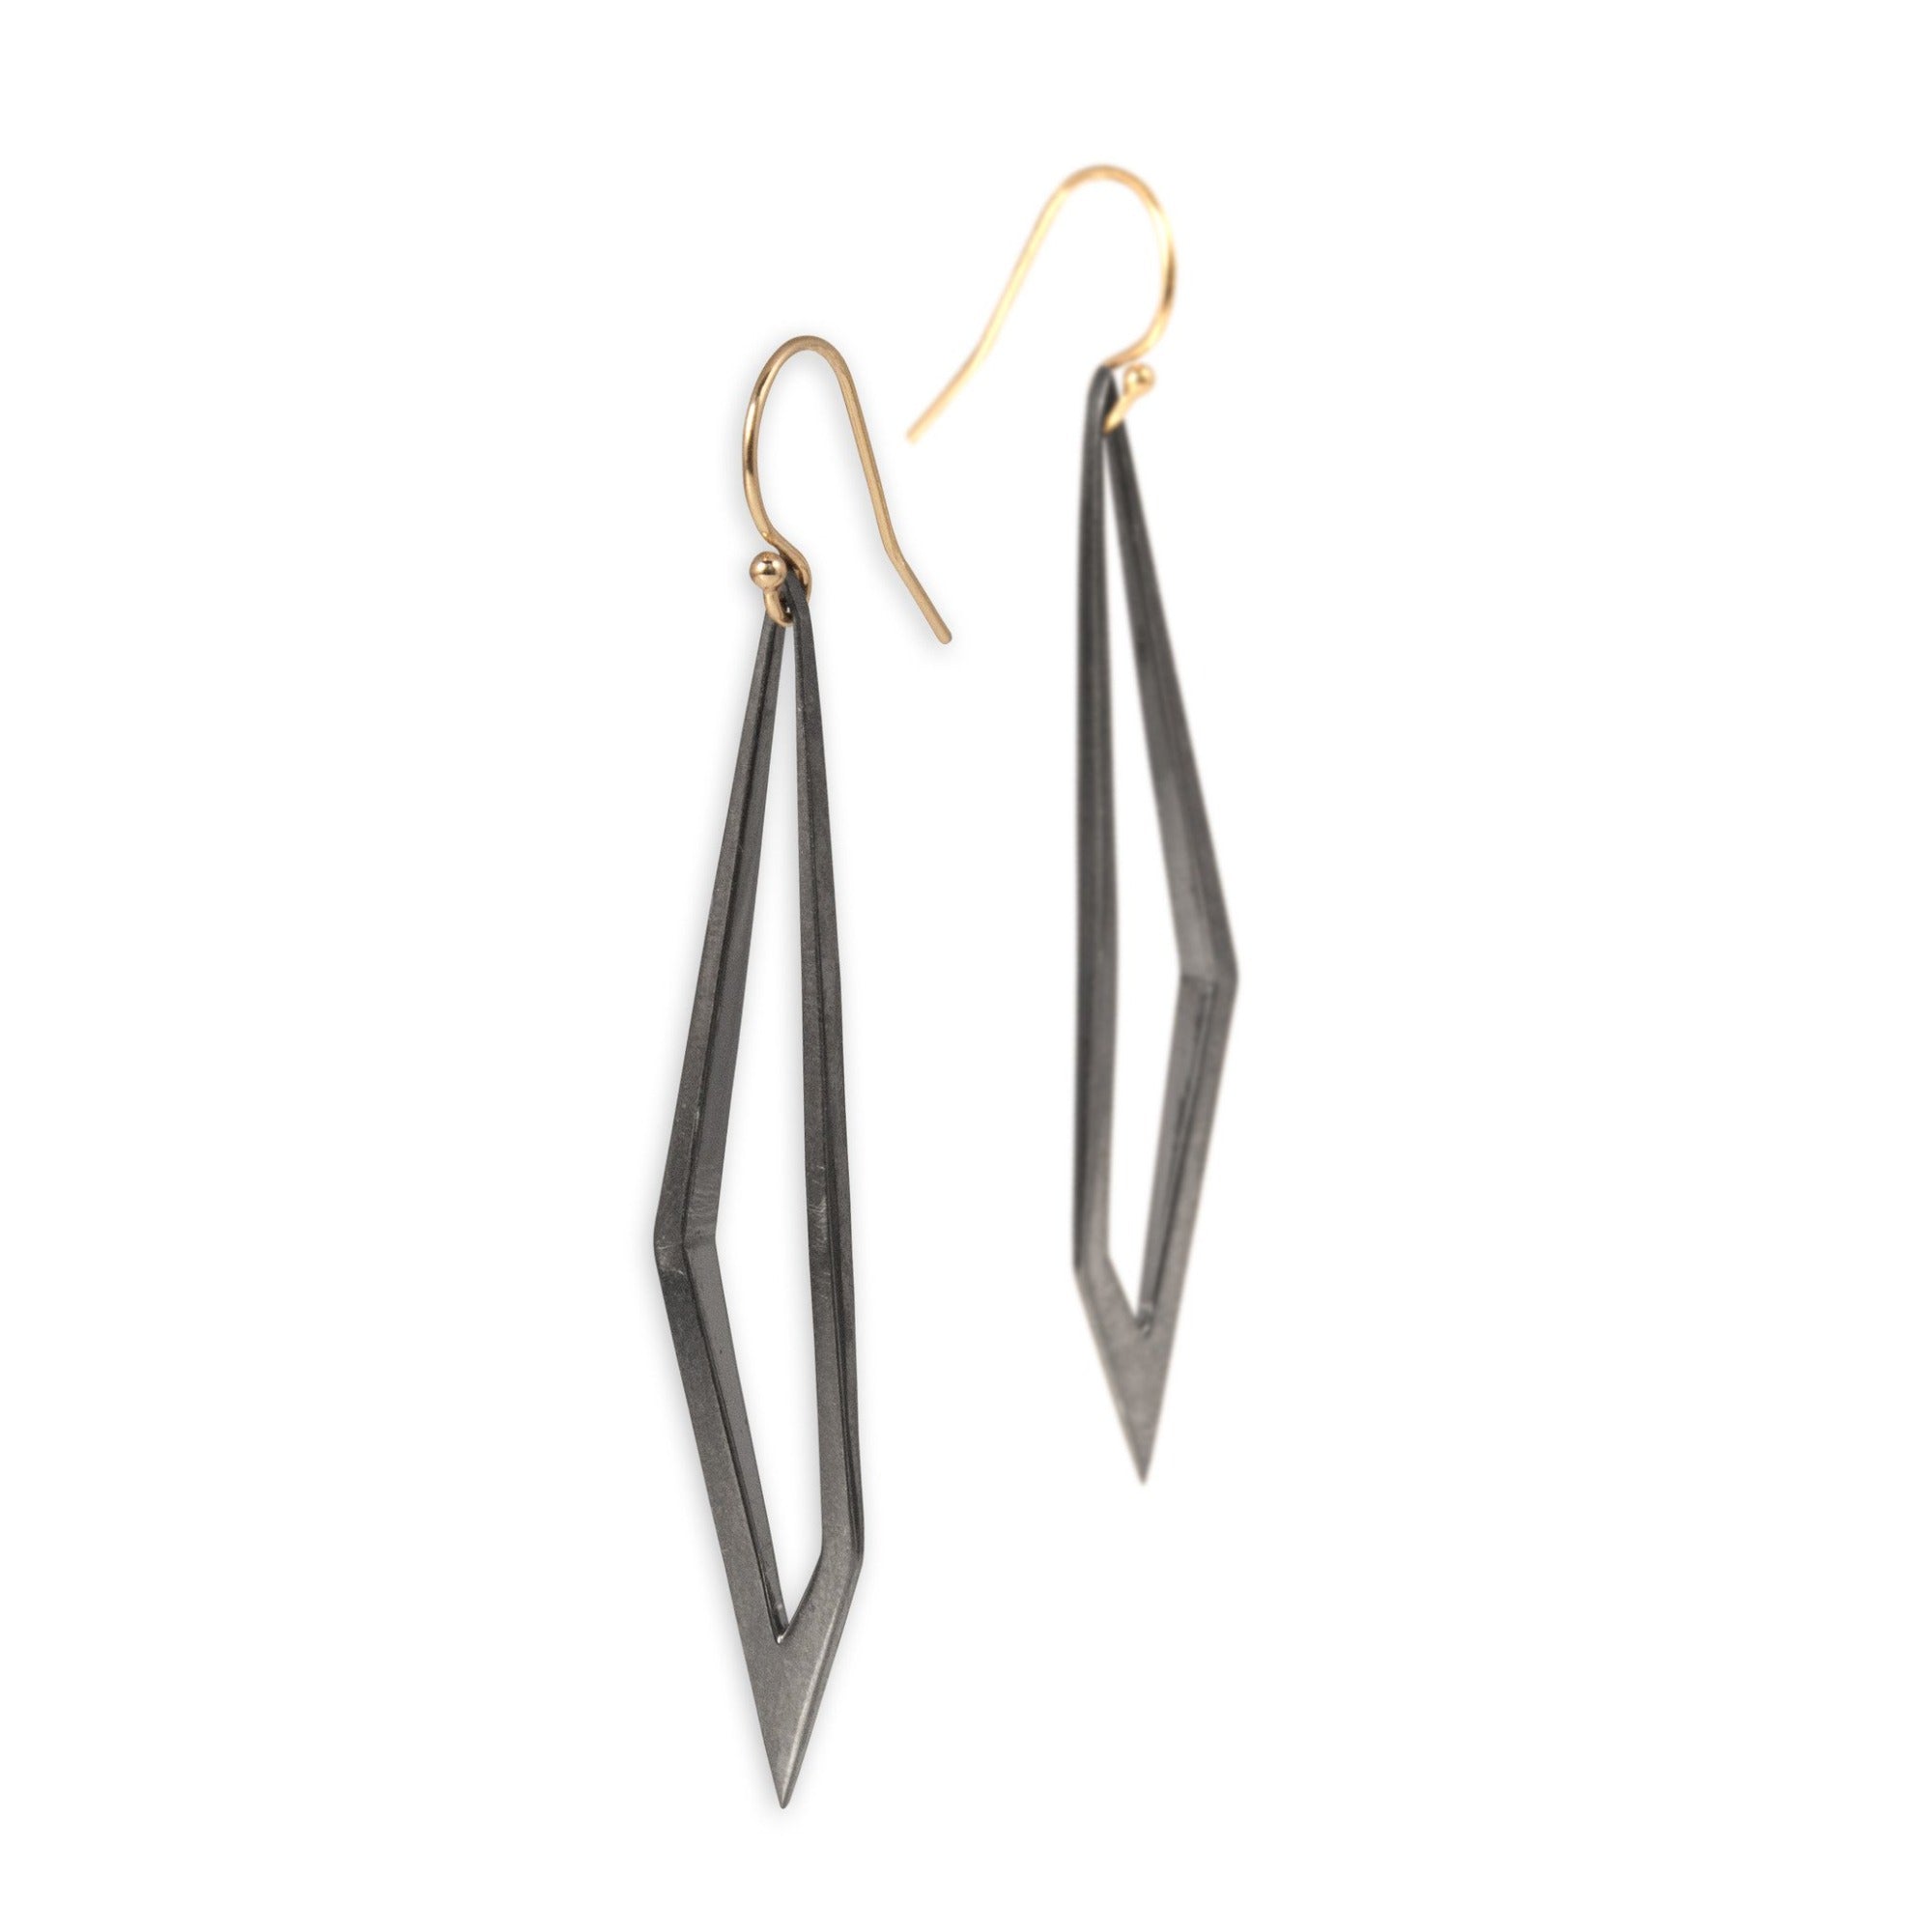 sterling silver plated in black rhodium with 14k gold ear wires hedron dangle earrings